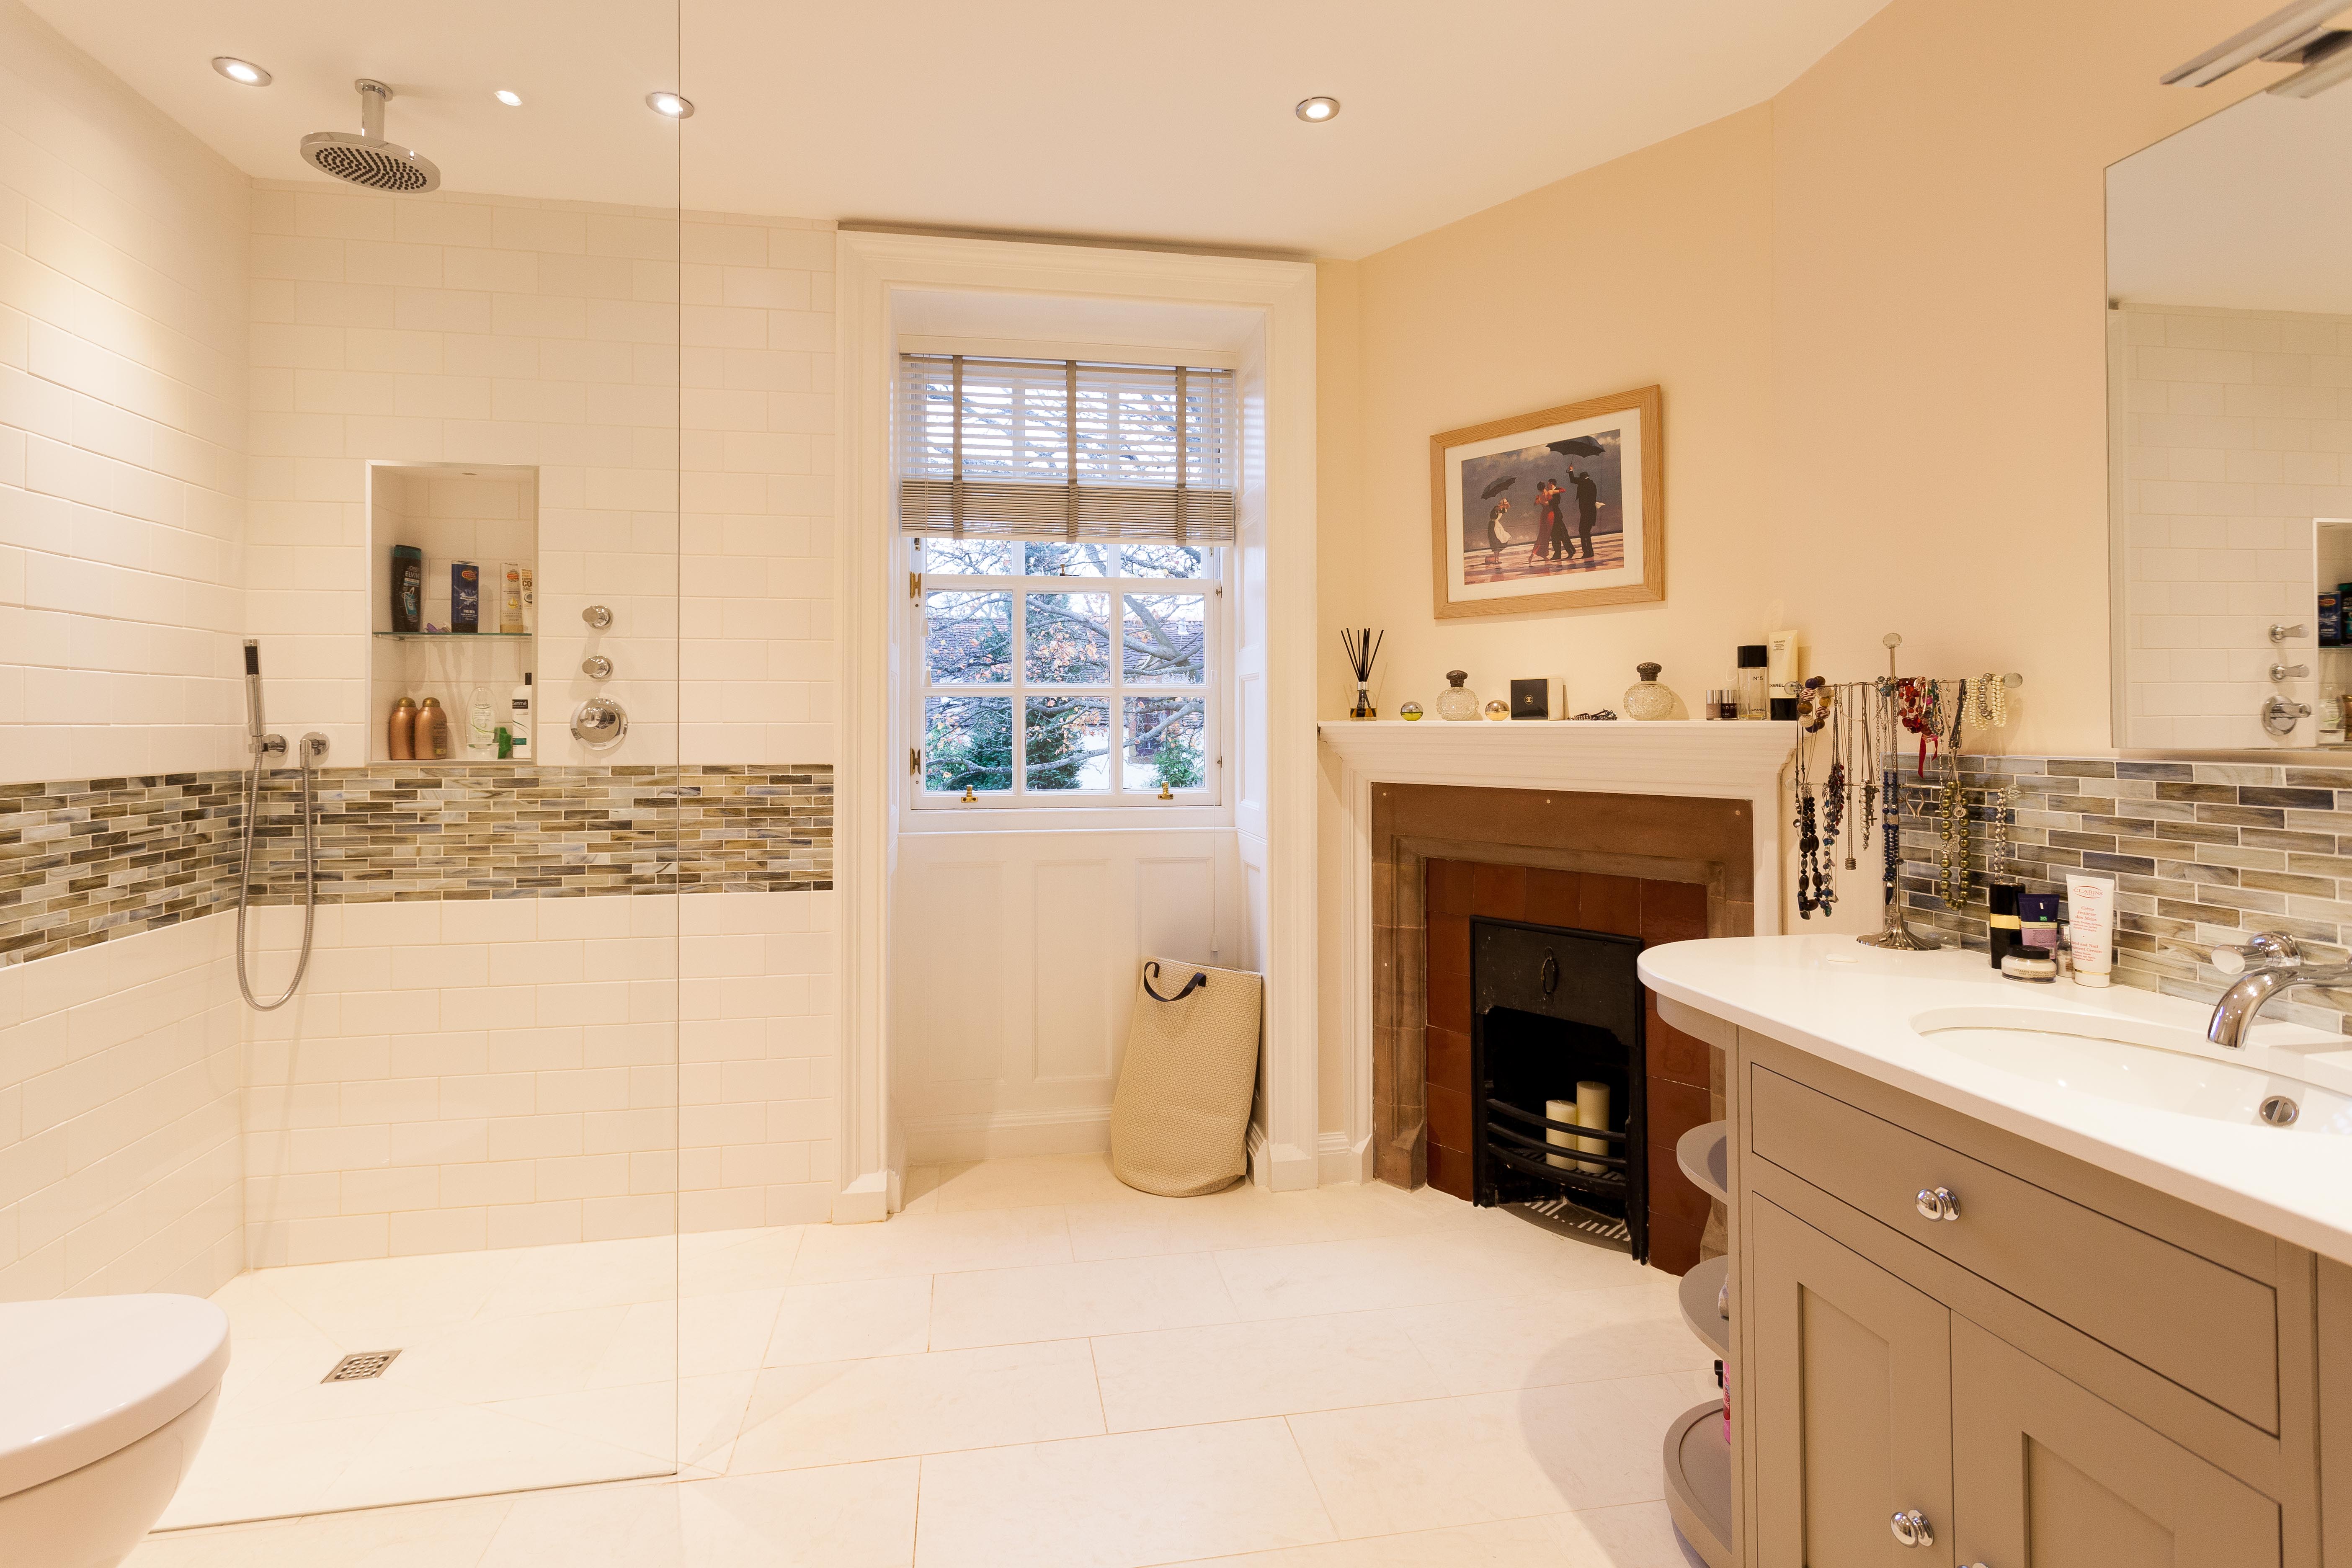 Large traditional bathroom with open fireplace